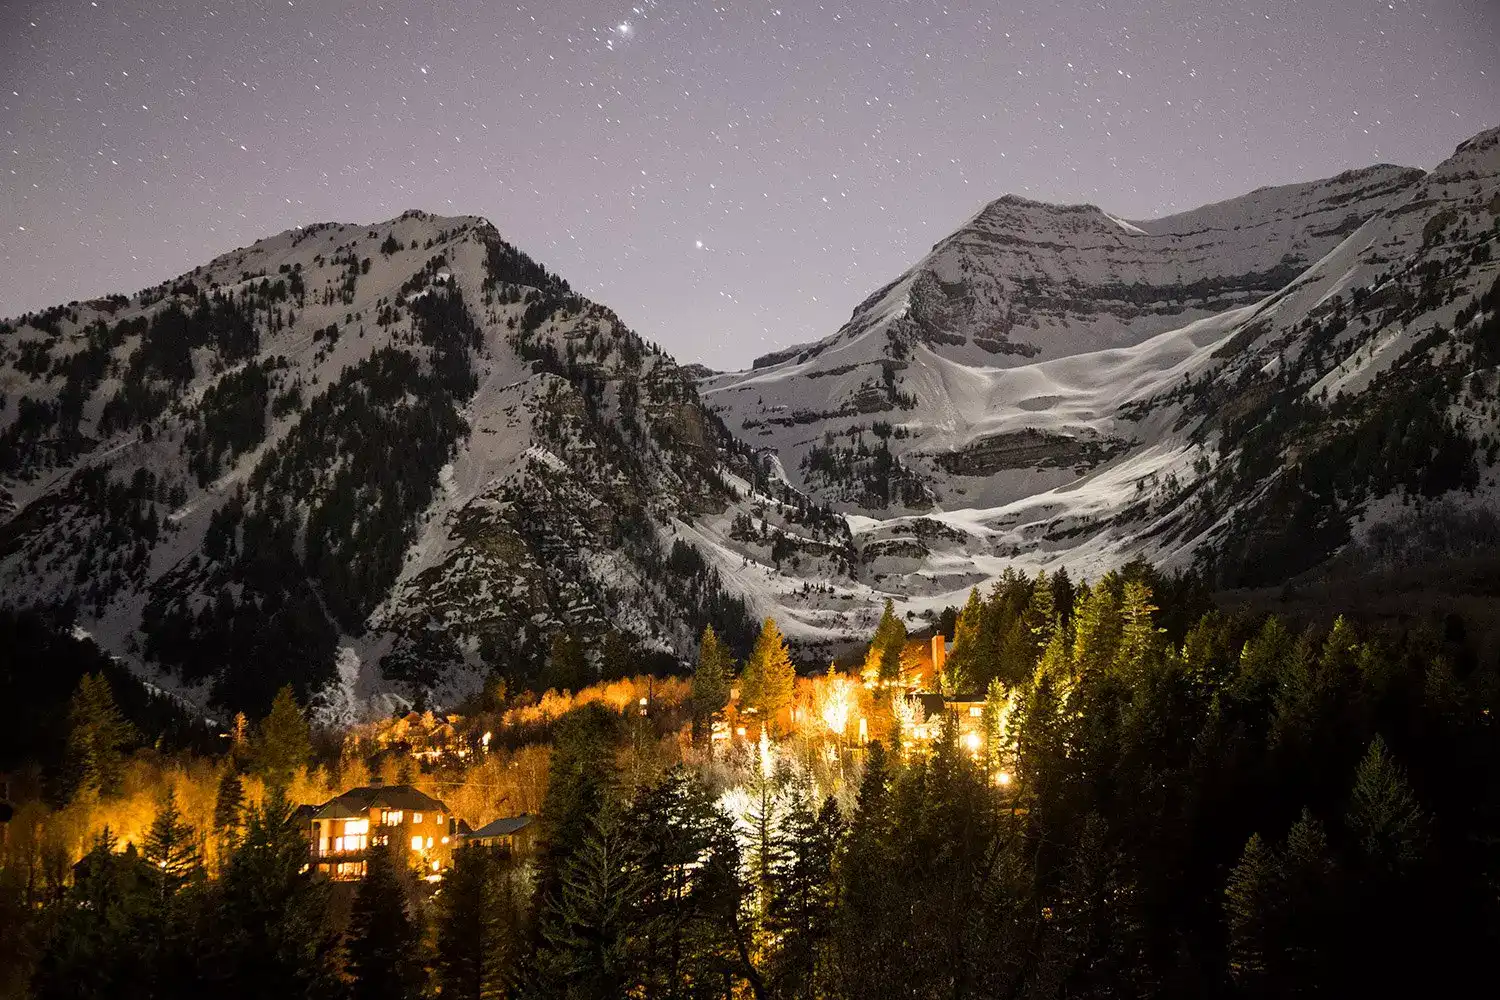 Sundance Mountain Resort at Night with Stars and a Village Glow